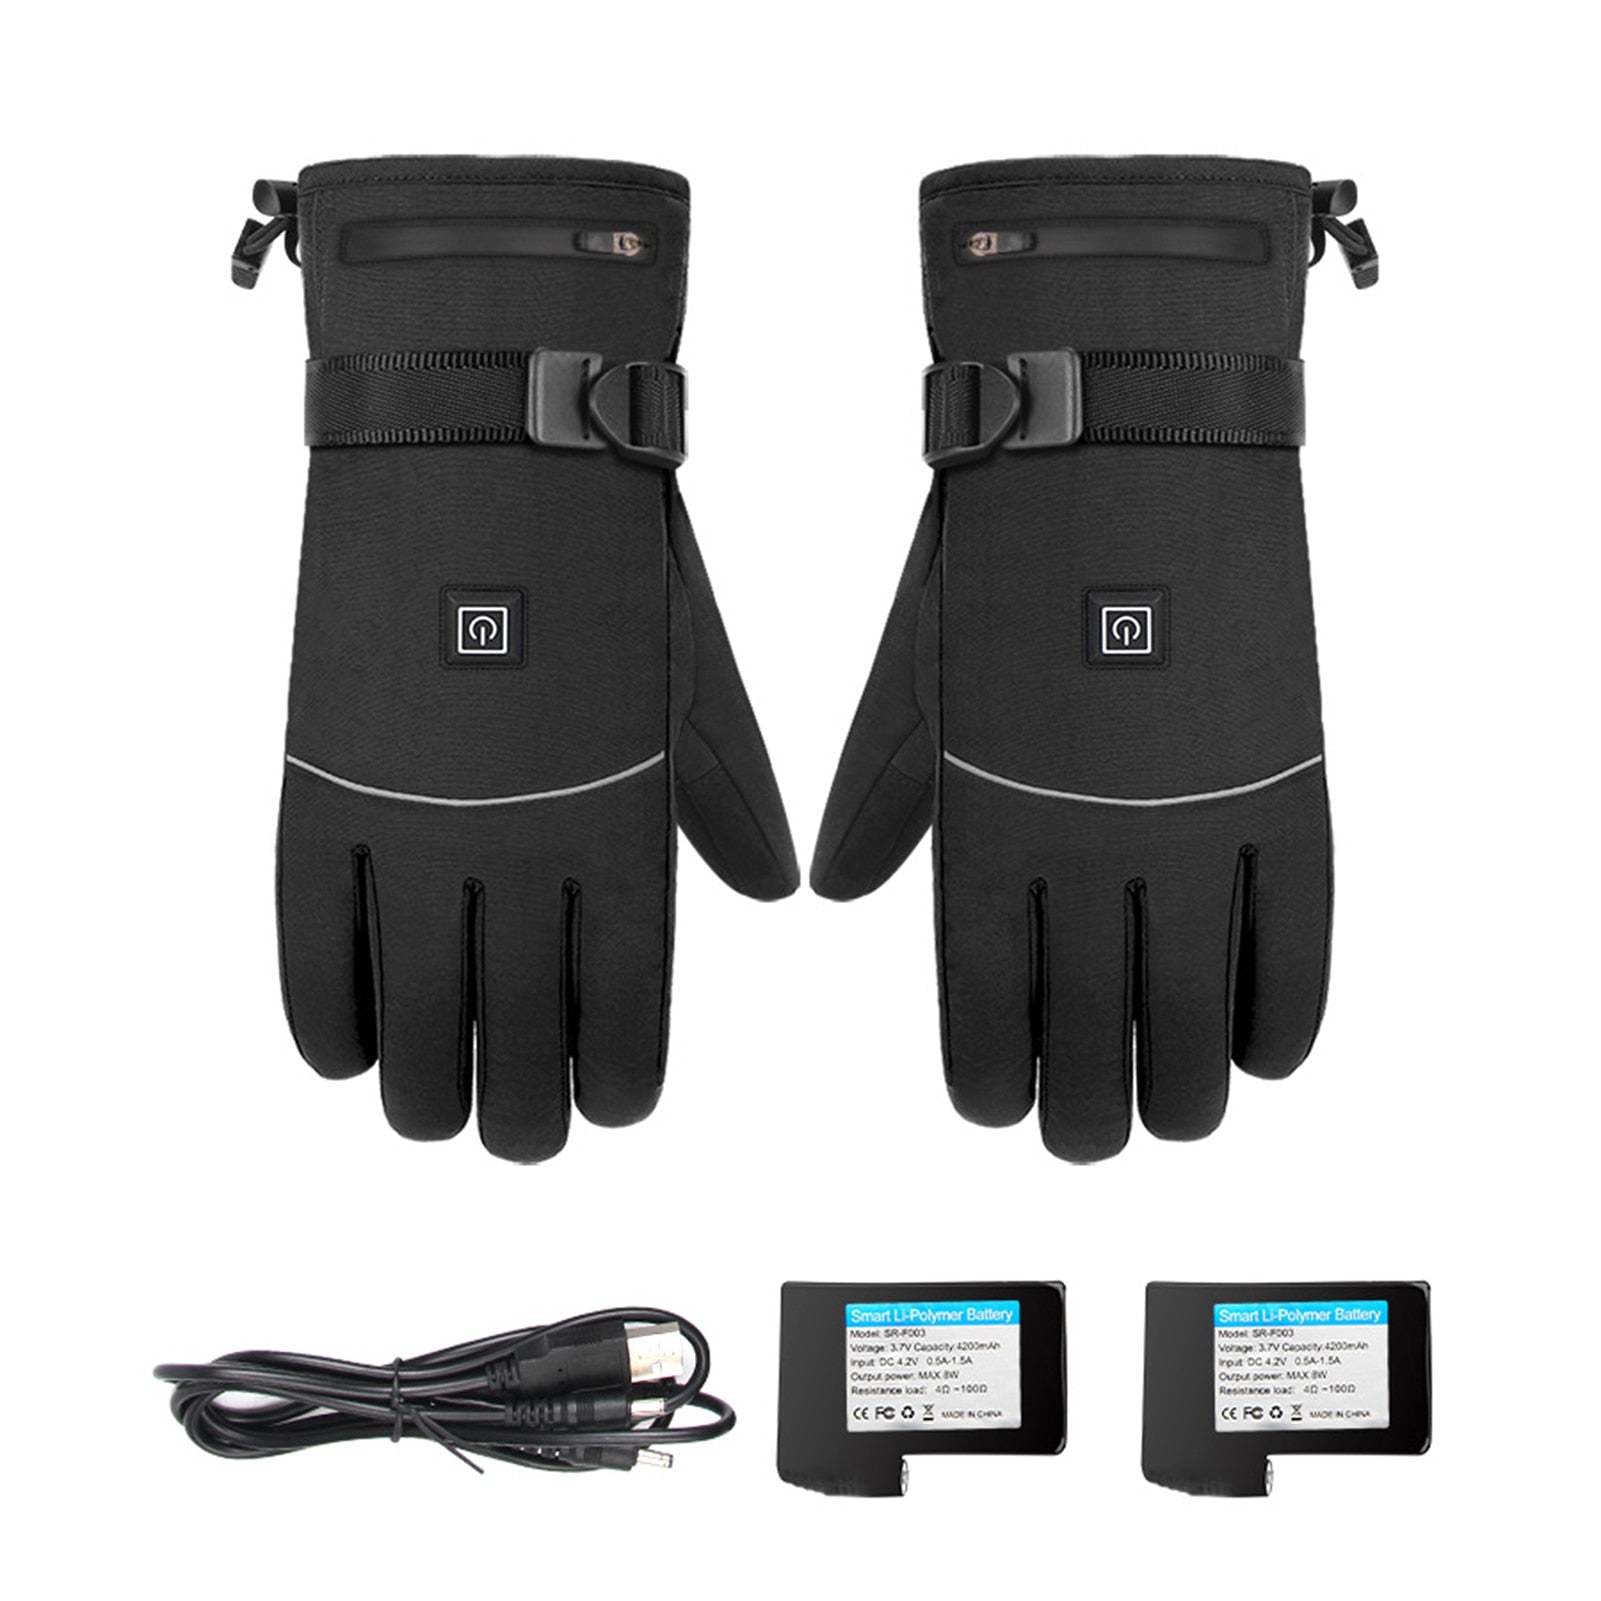 Heated Gloves 3.7V Waterproof Heated Guantes Touch Screen Battery Powered Motorbike  Hunting Fishing Skiing Cycling Gloves - lebenoutdoors